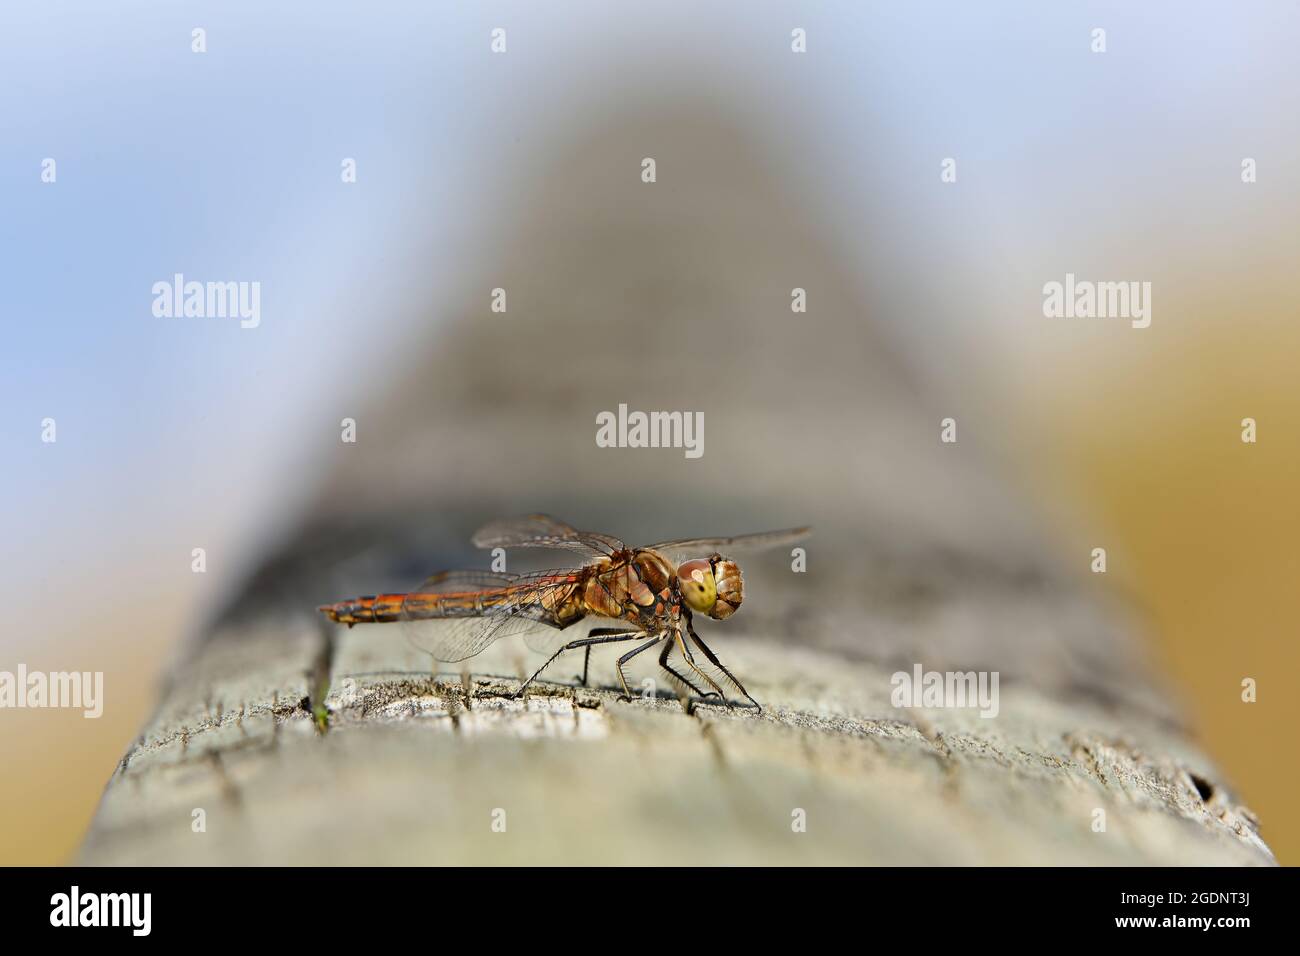 Ruddy Darter Dragonfly resting on a wooden handrail Stock Photo